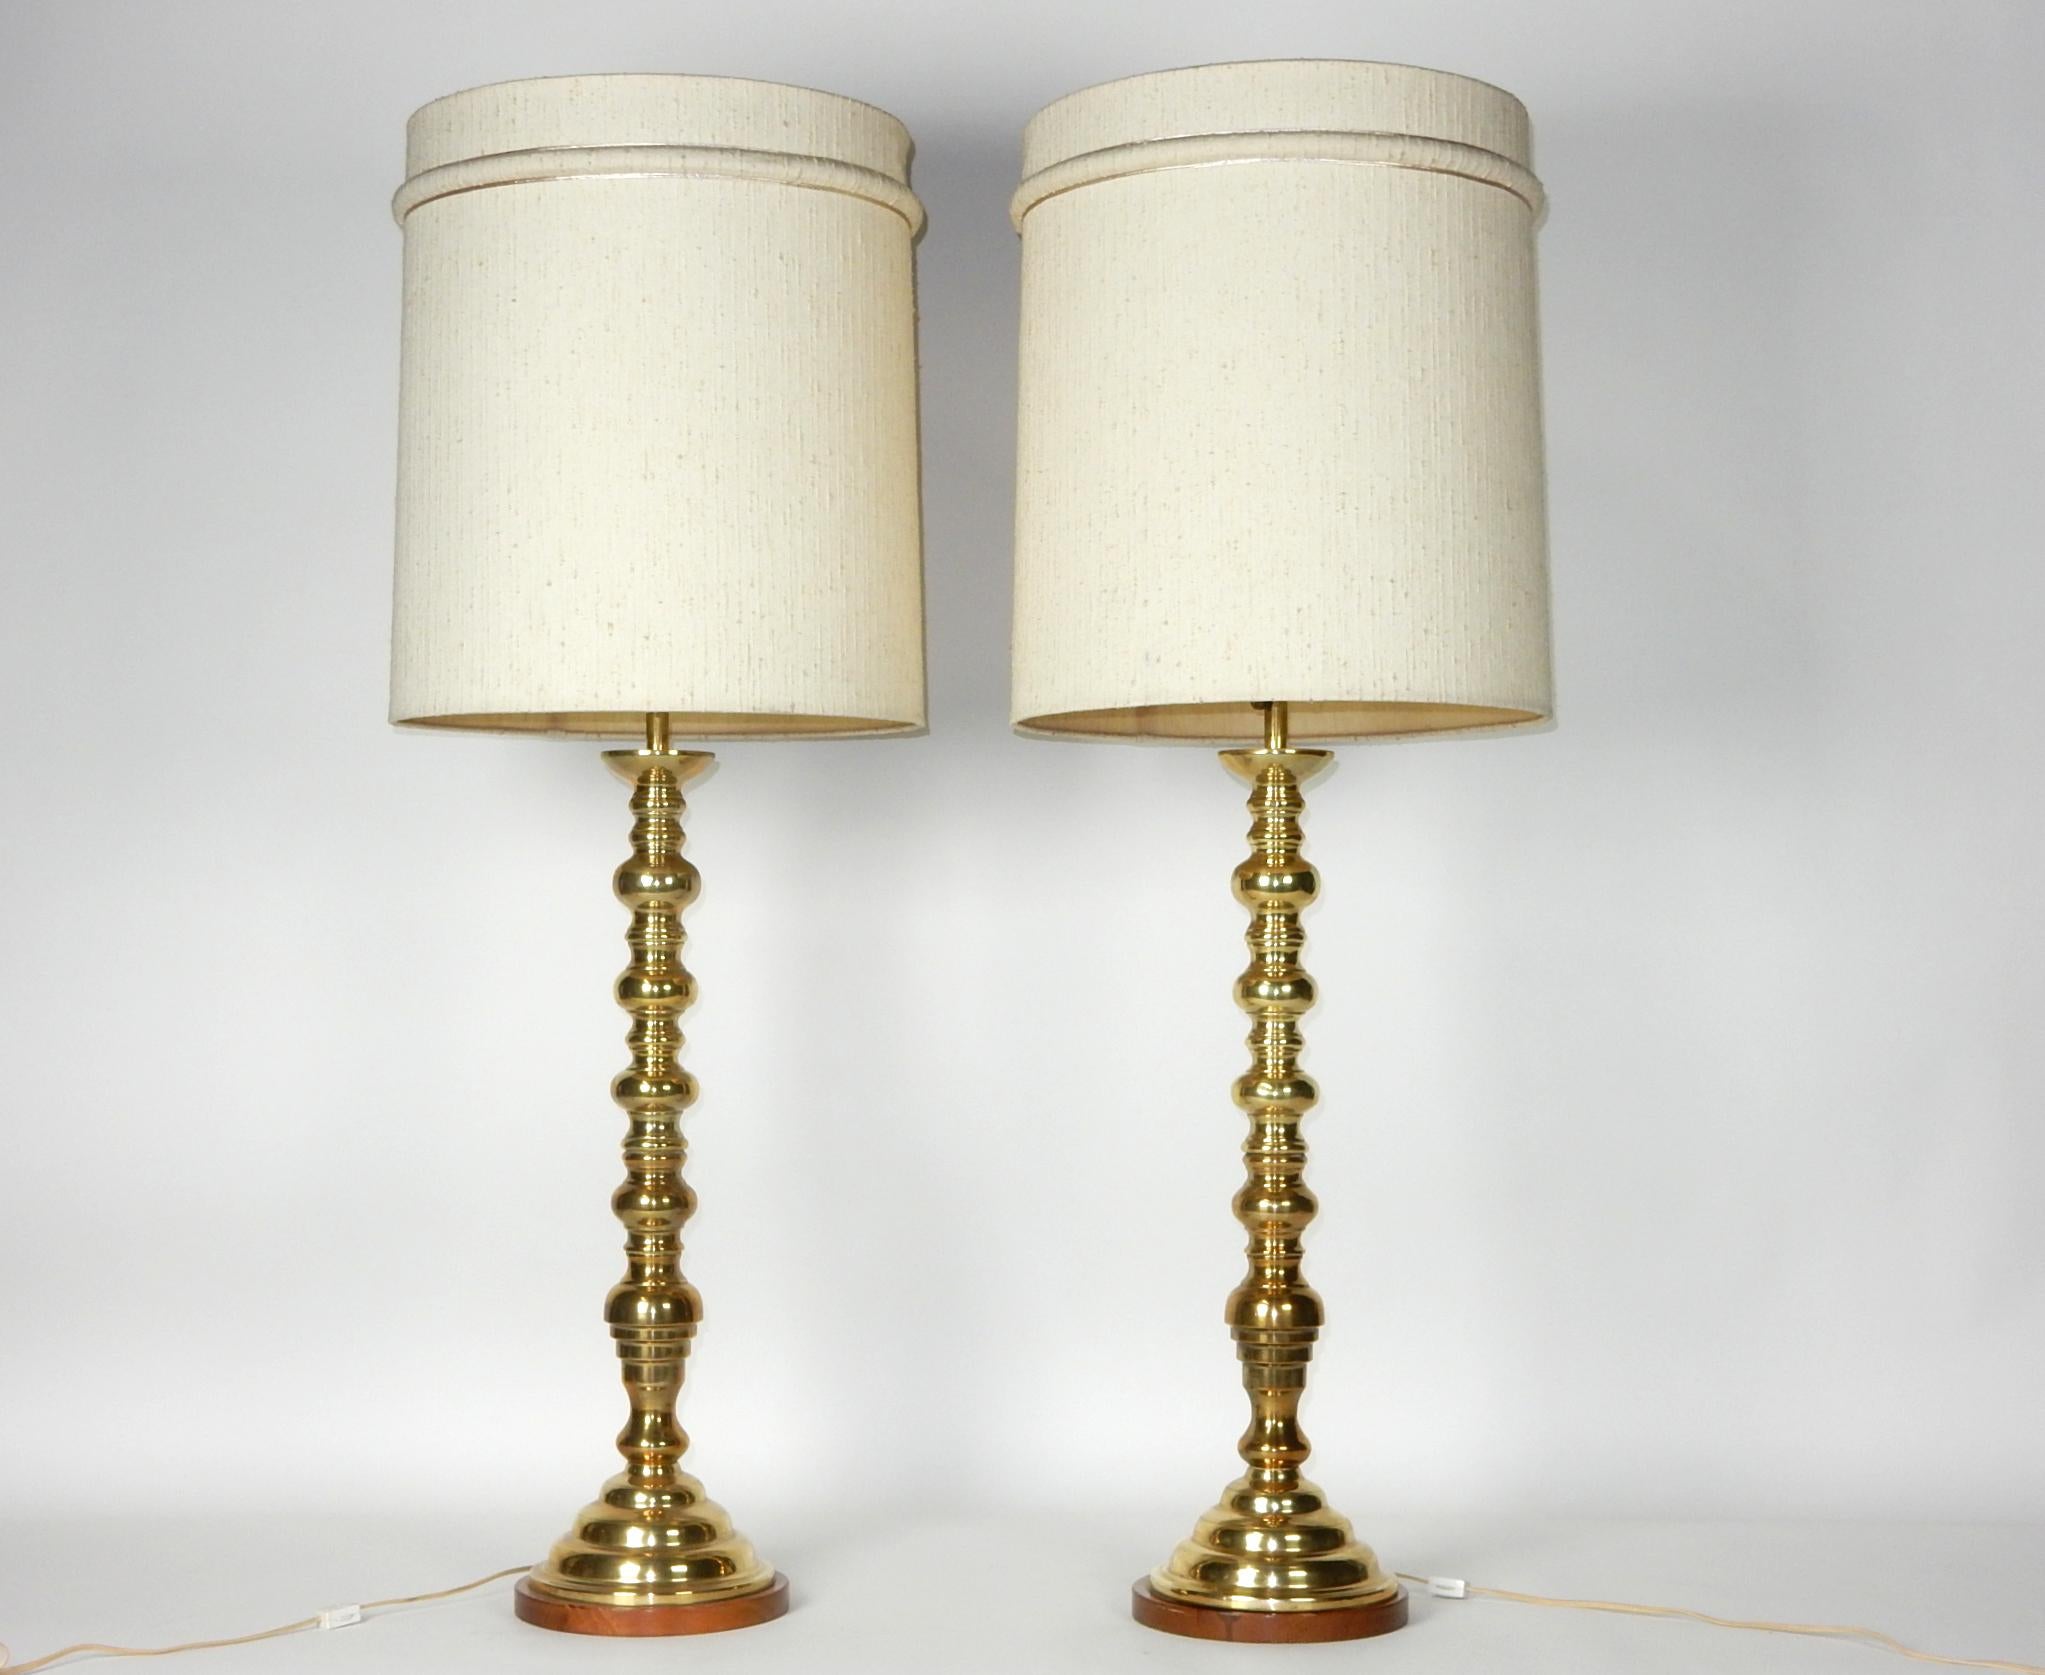 Art Deco Era Tall Brass Candlestick Table Lamps For Sale 2